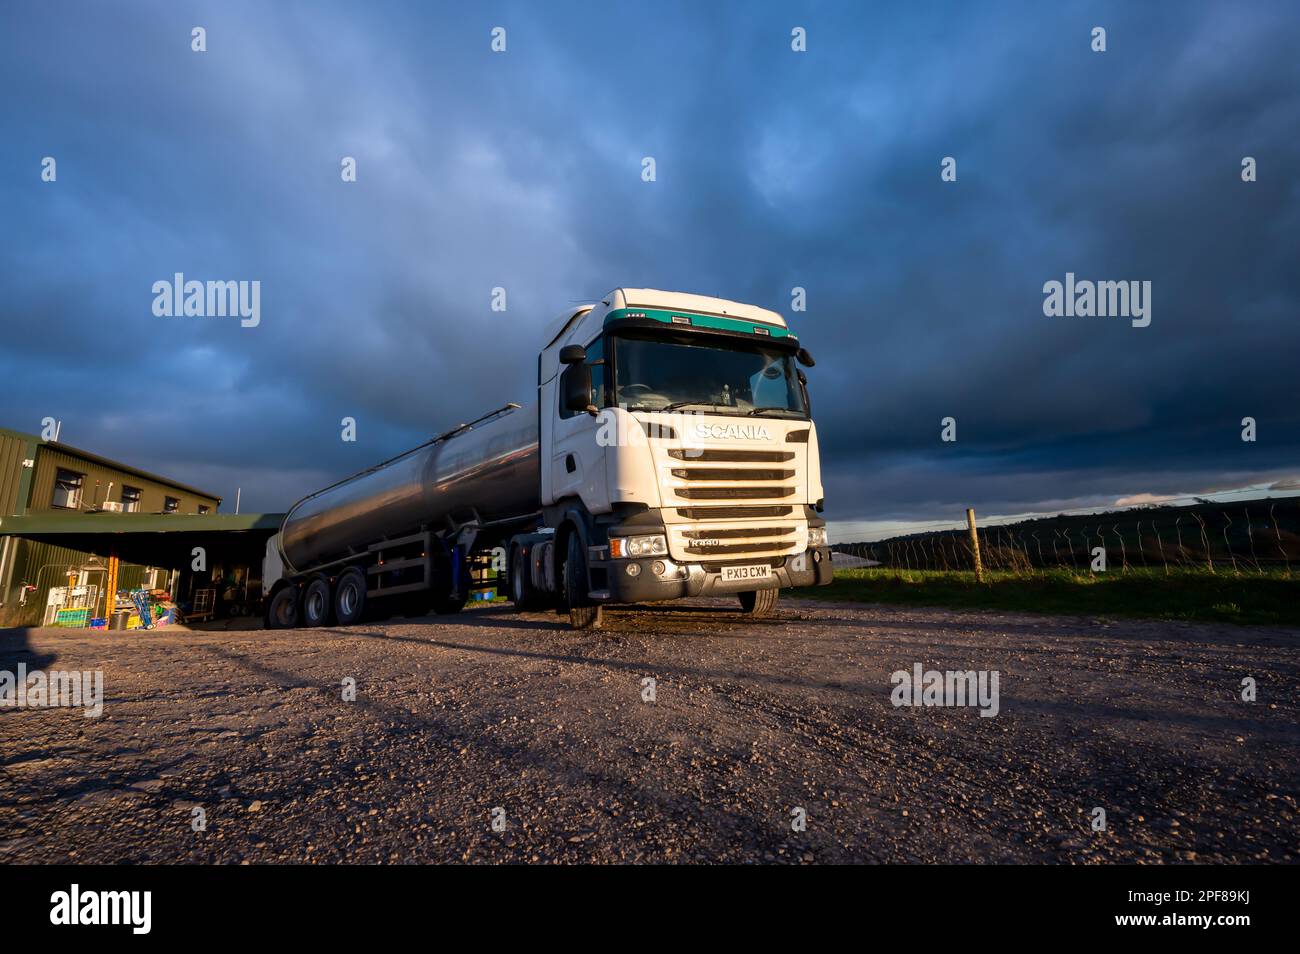 Scania truck pulling a tanker trailer loads up with milk from a dairy farm in South Yorkshire on a cloudy day in Winter Stock Photo